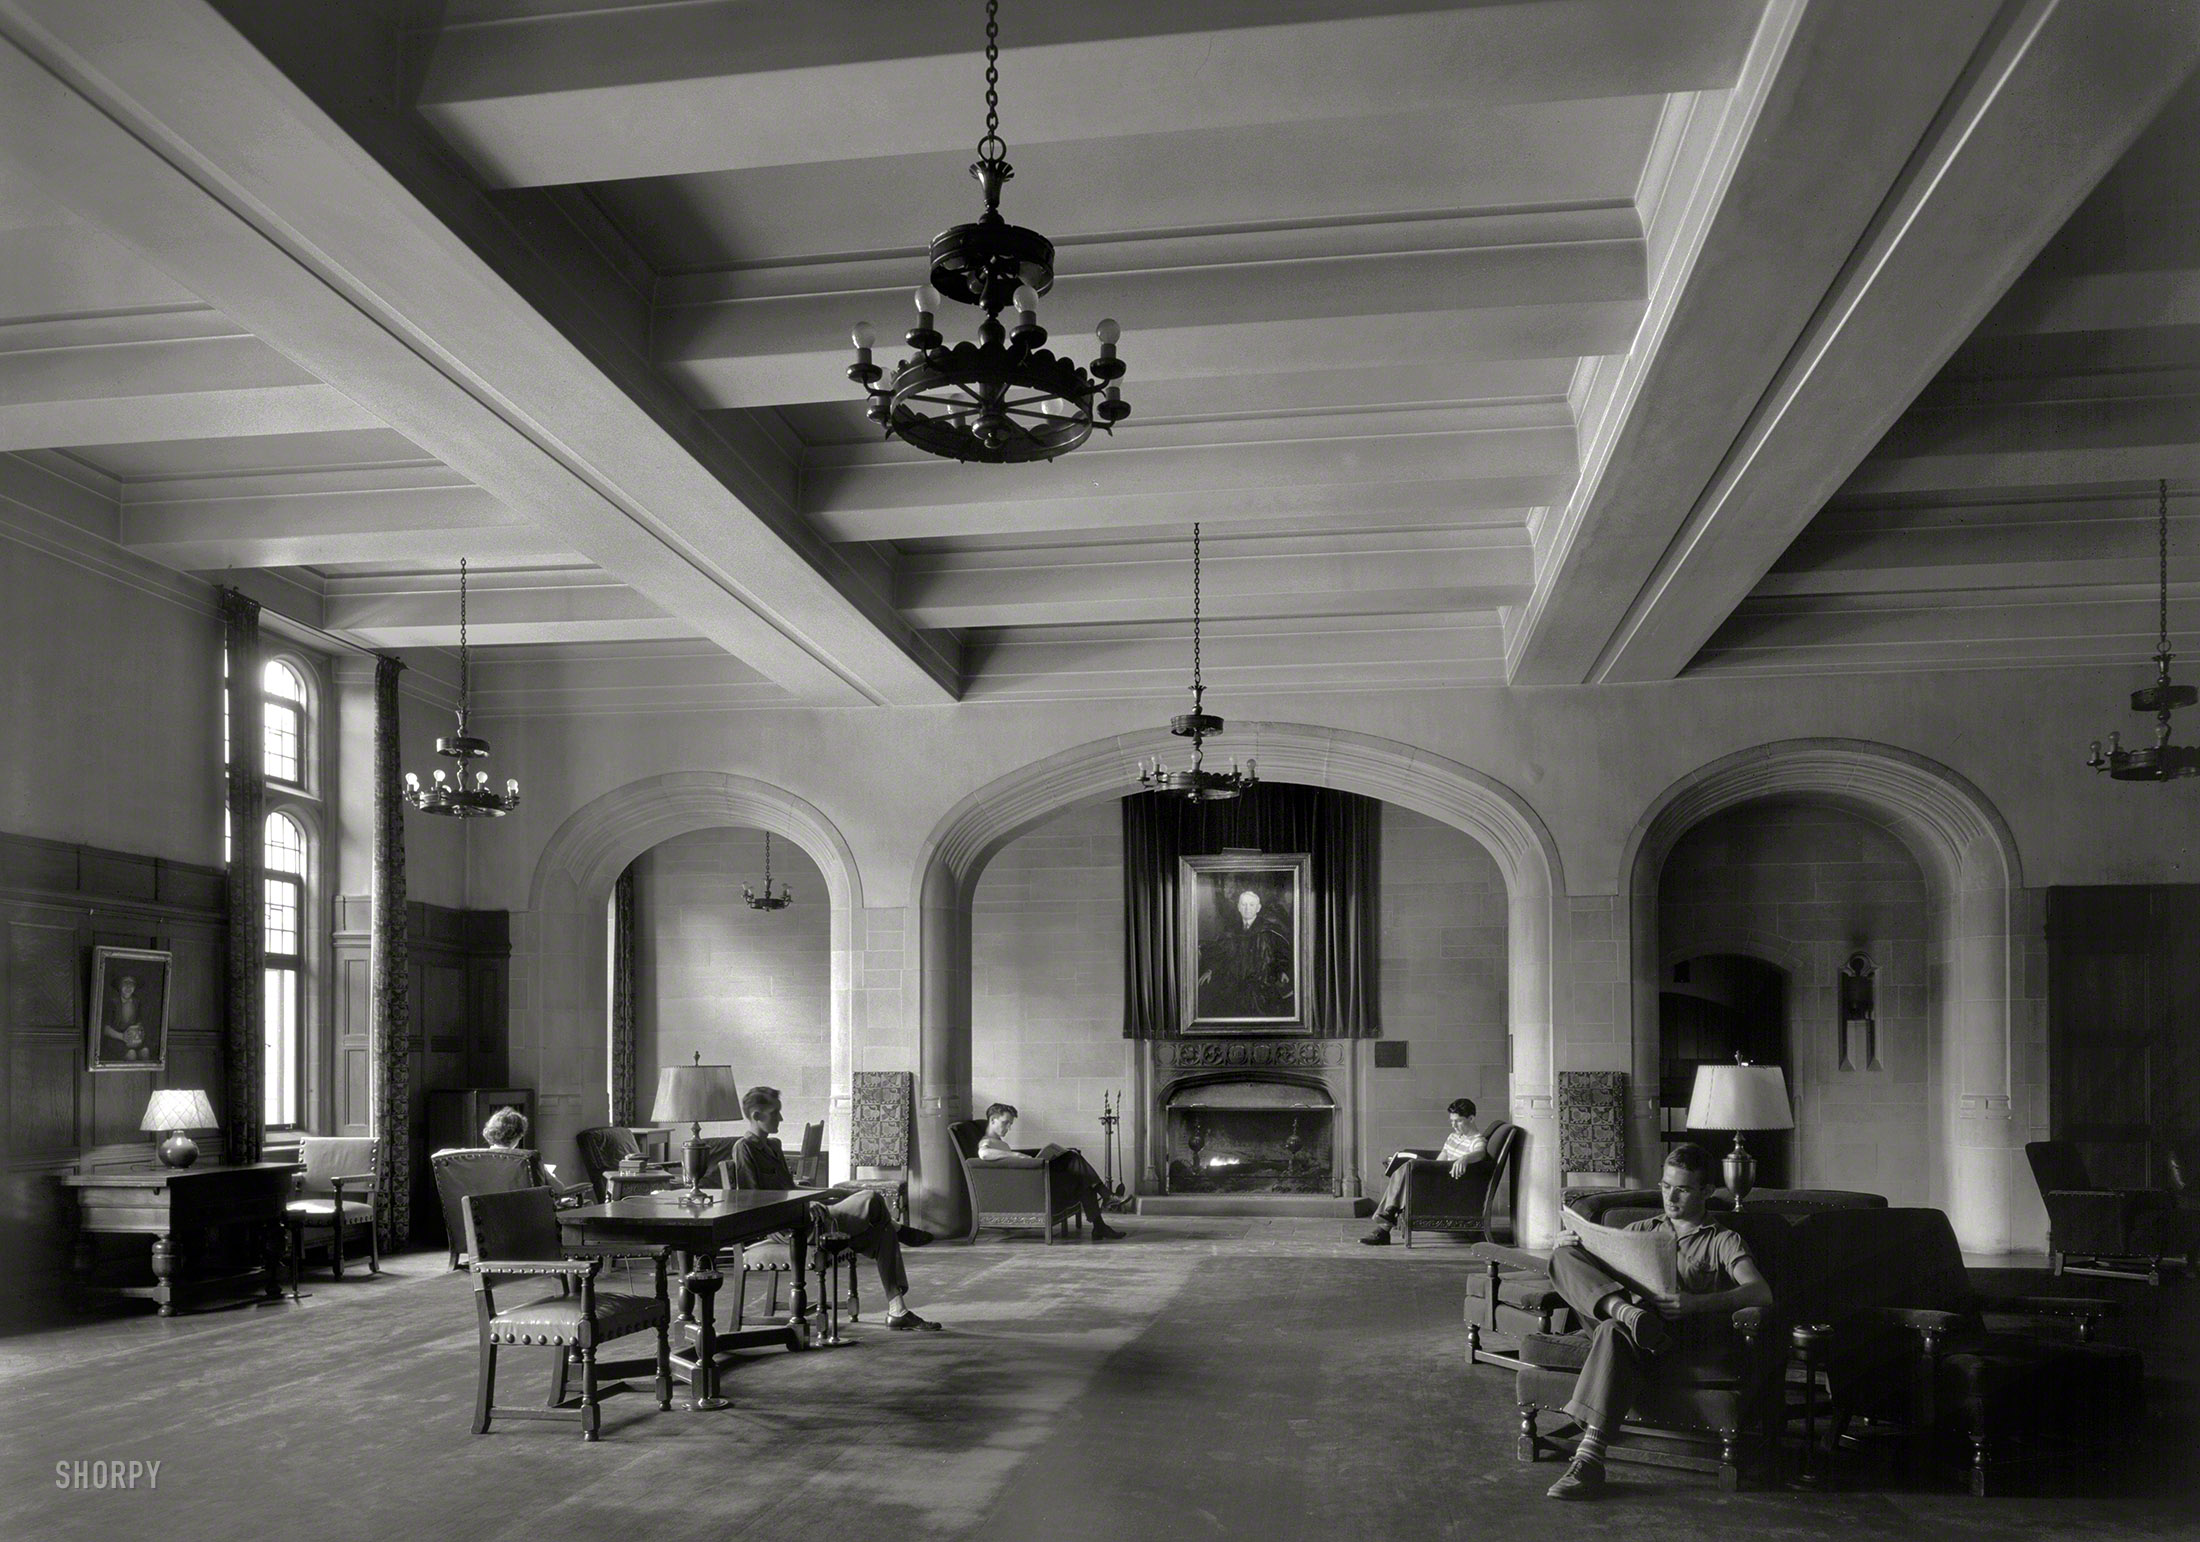 June 6, 1942. "Indiana Union Building, Indiana University, Bloomington. Lounge I." Large-format acetate negative by Gottscho-Schleisner. View full size.